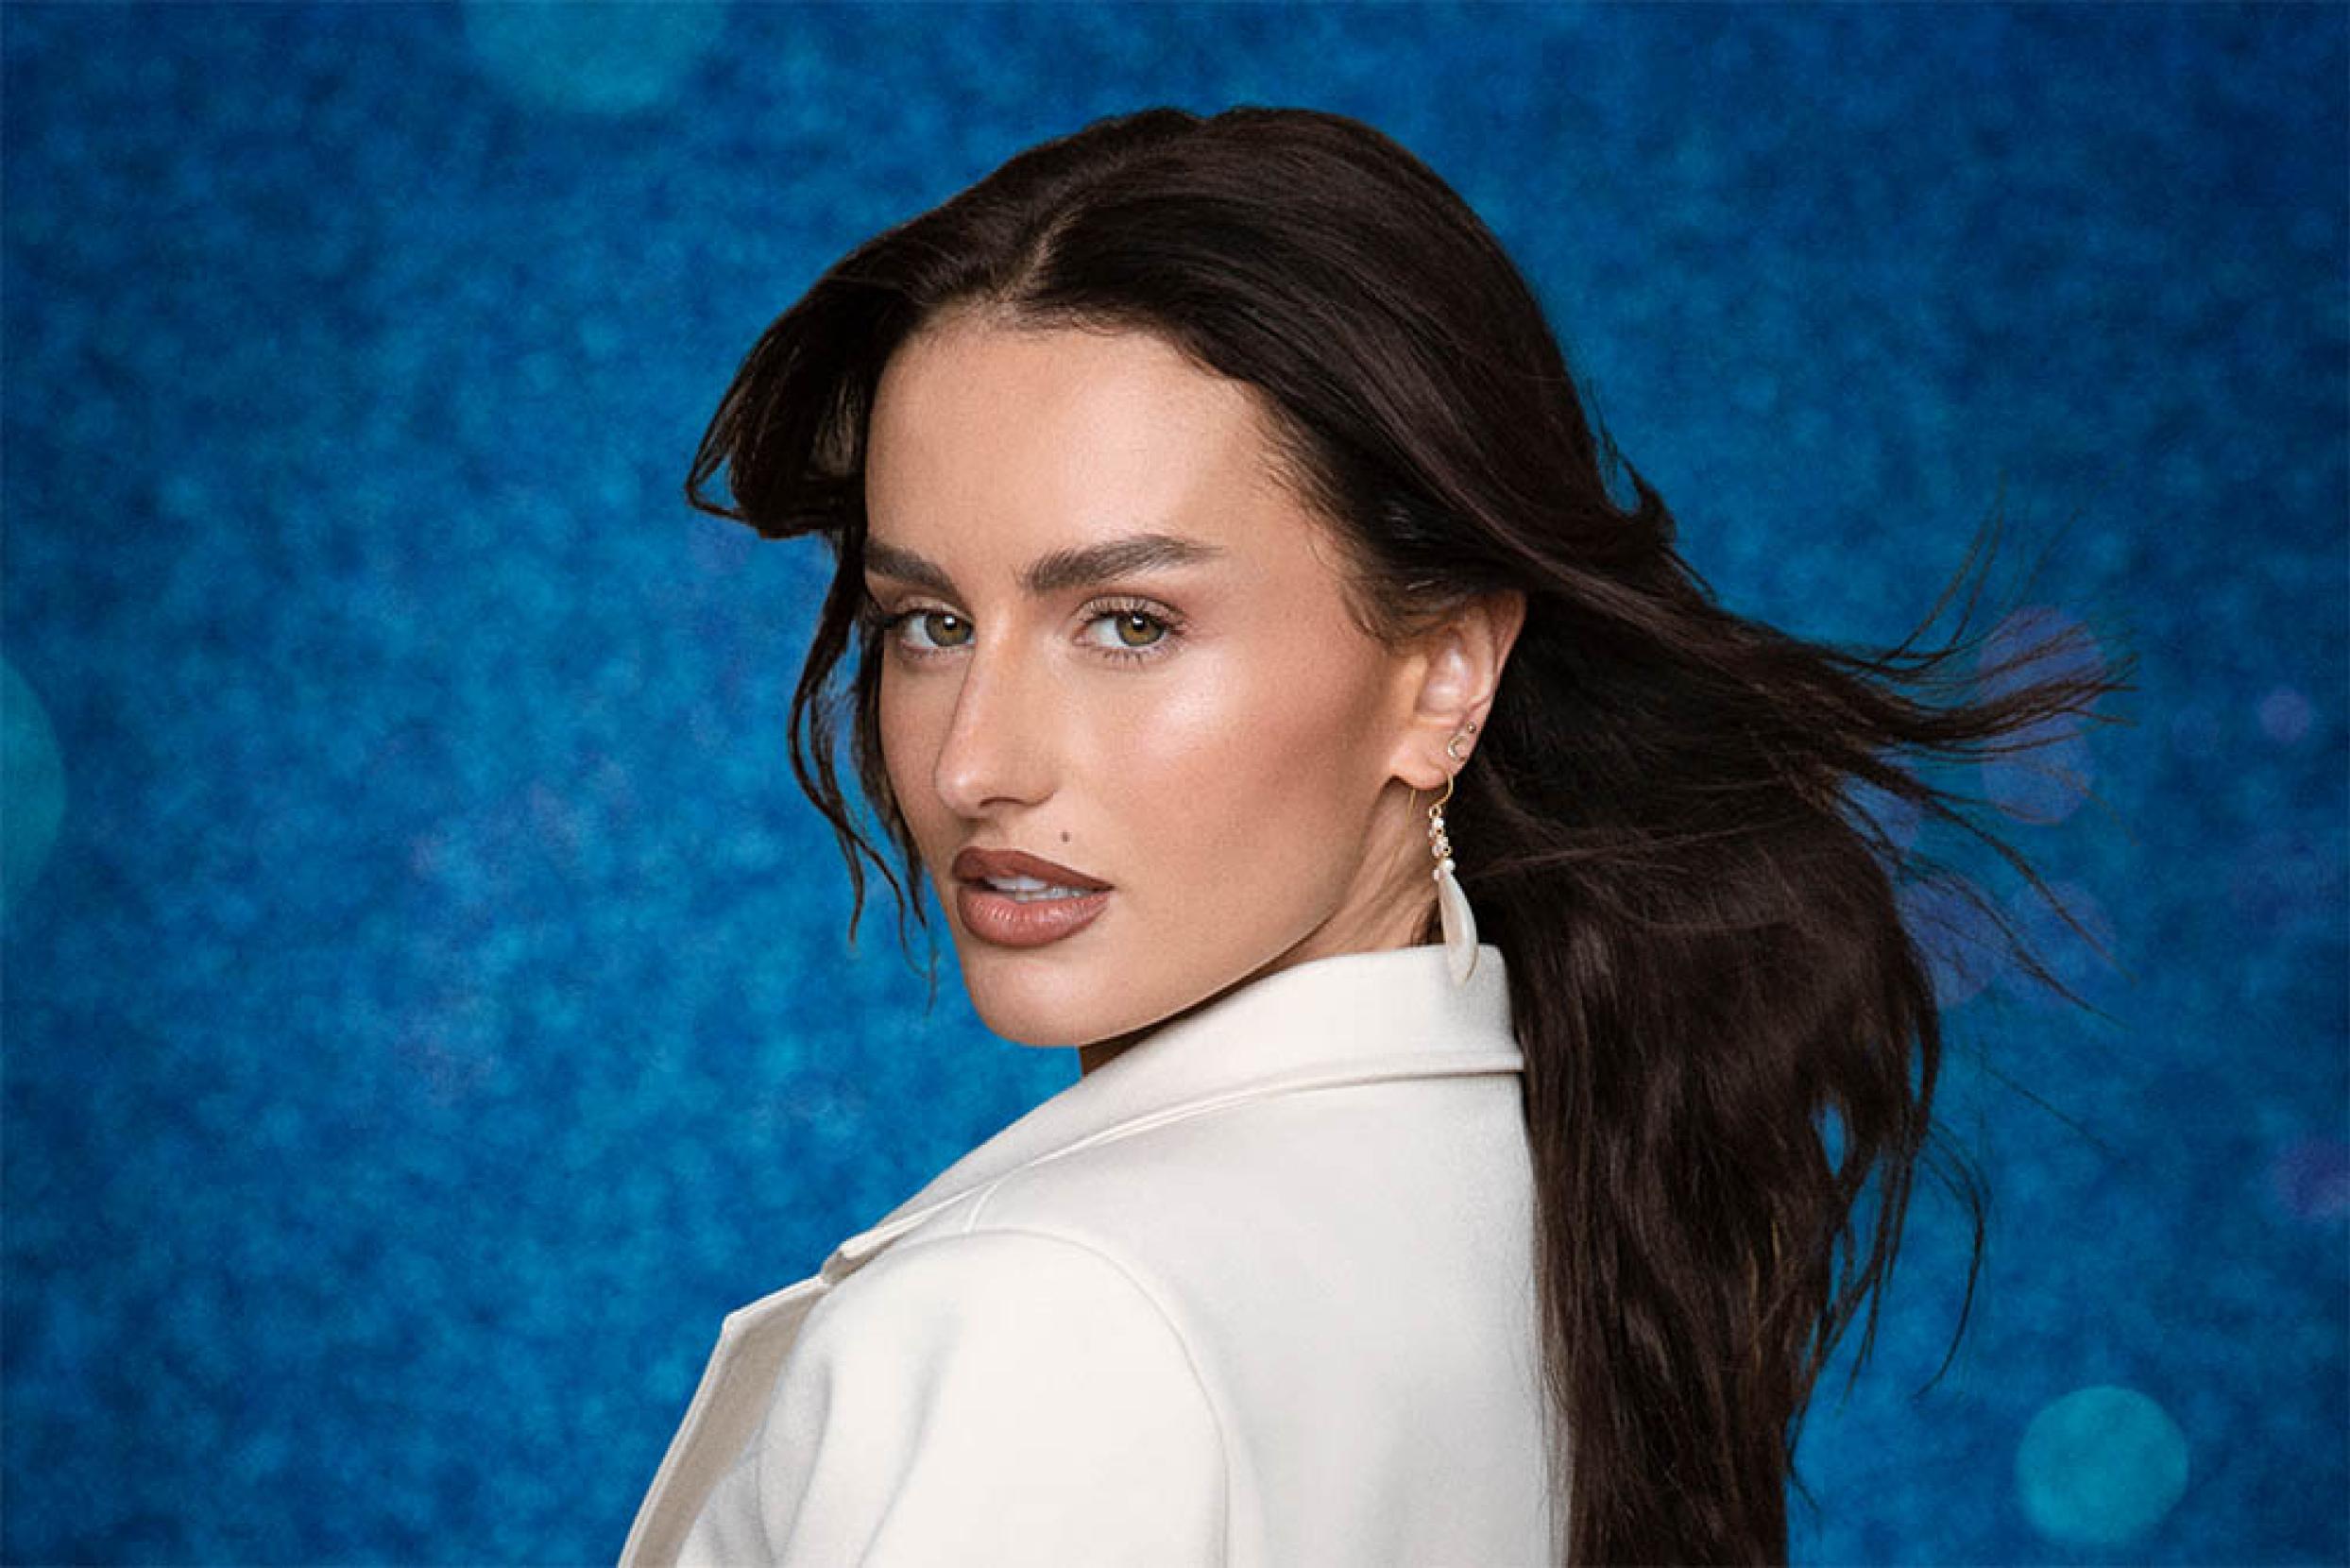 West End star Amber Davies is the fourth celebrity confirmed for  the new series of Dancing on Ice